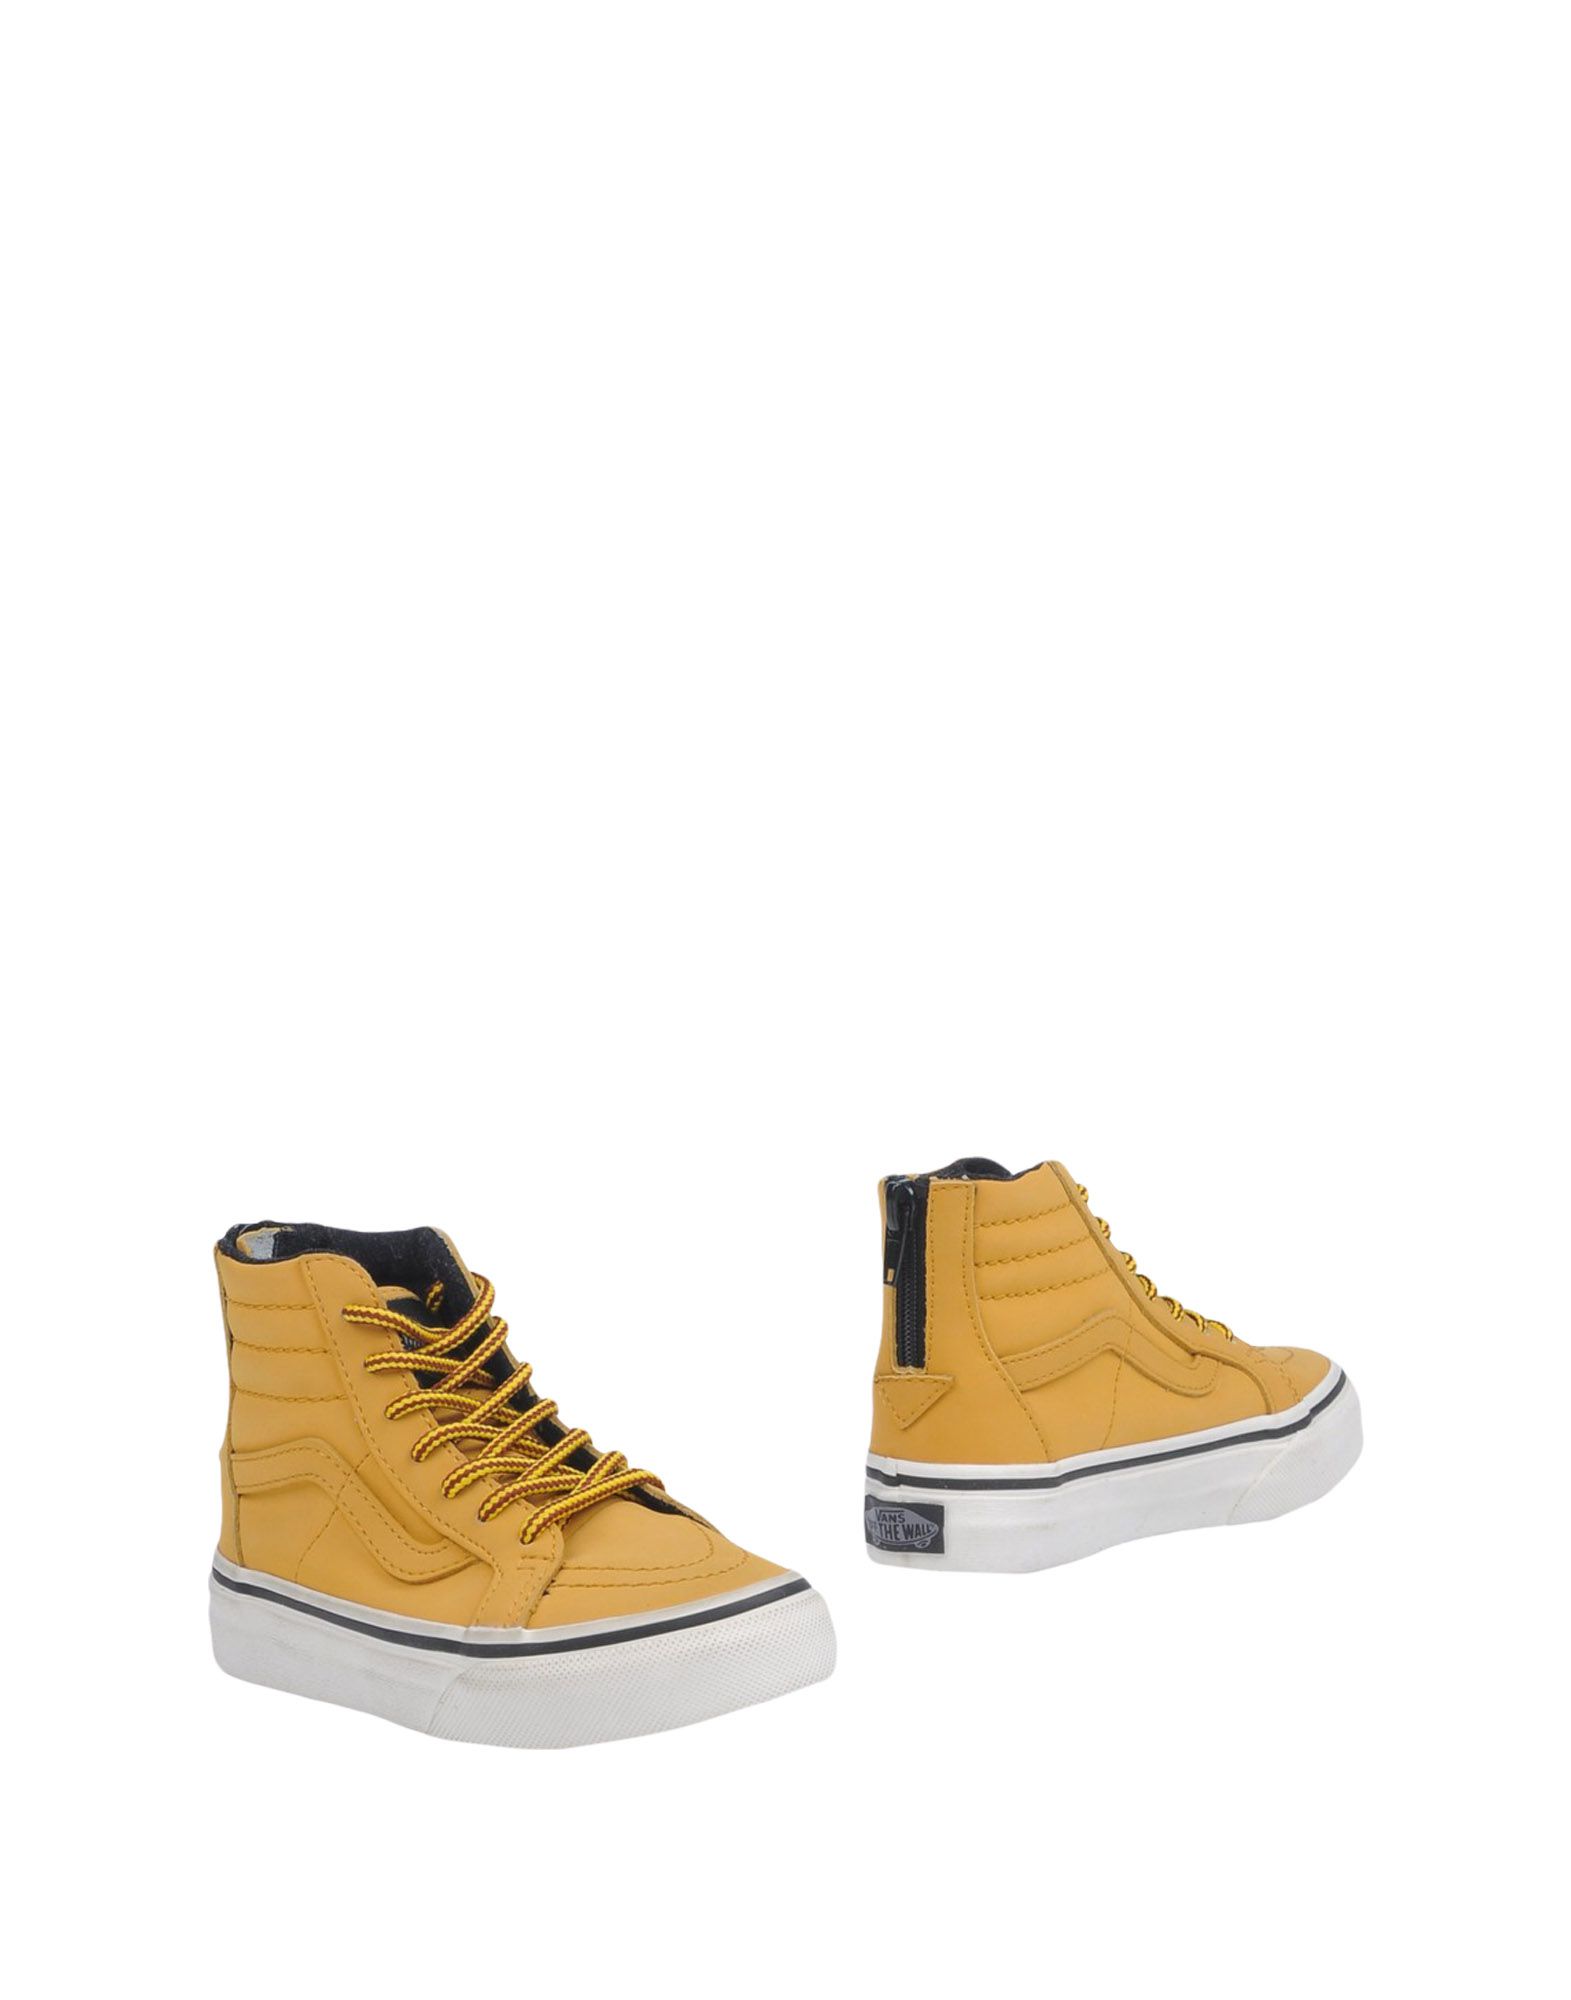 Vans Ankle Boots Girl 9-16 years online 